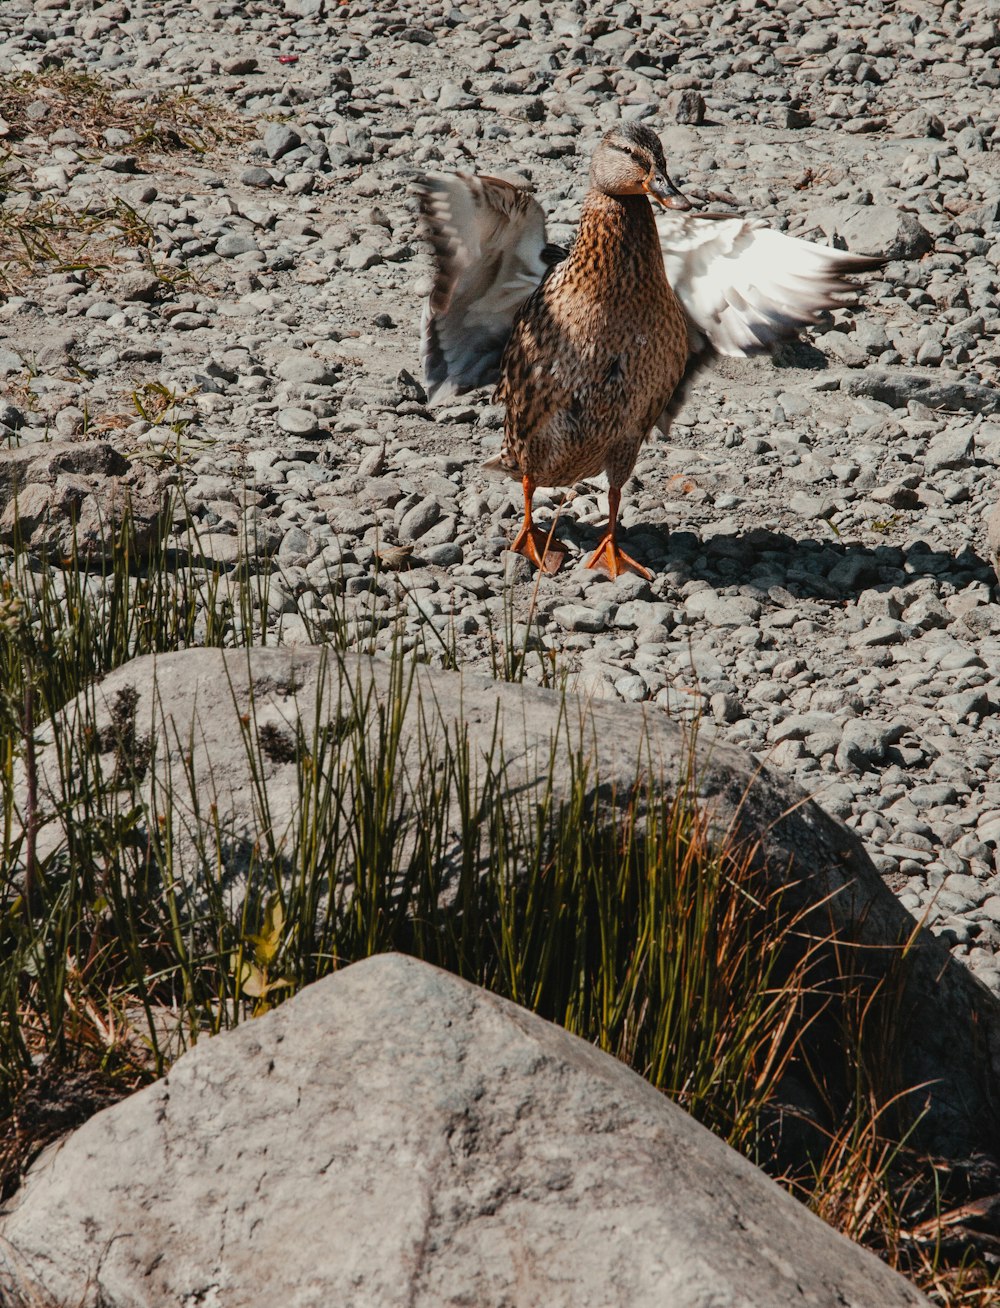 a bird standing on a rocky area next to a rock